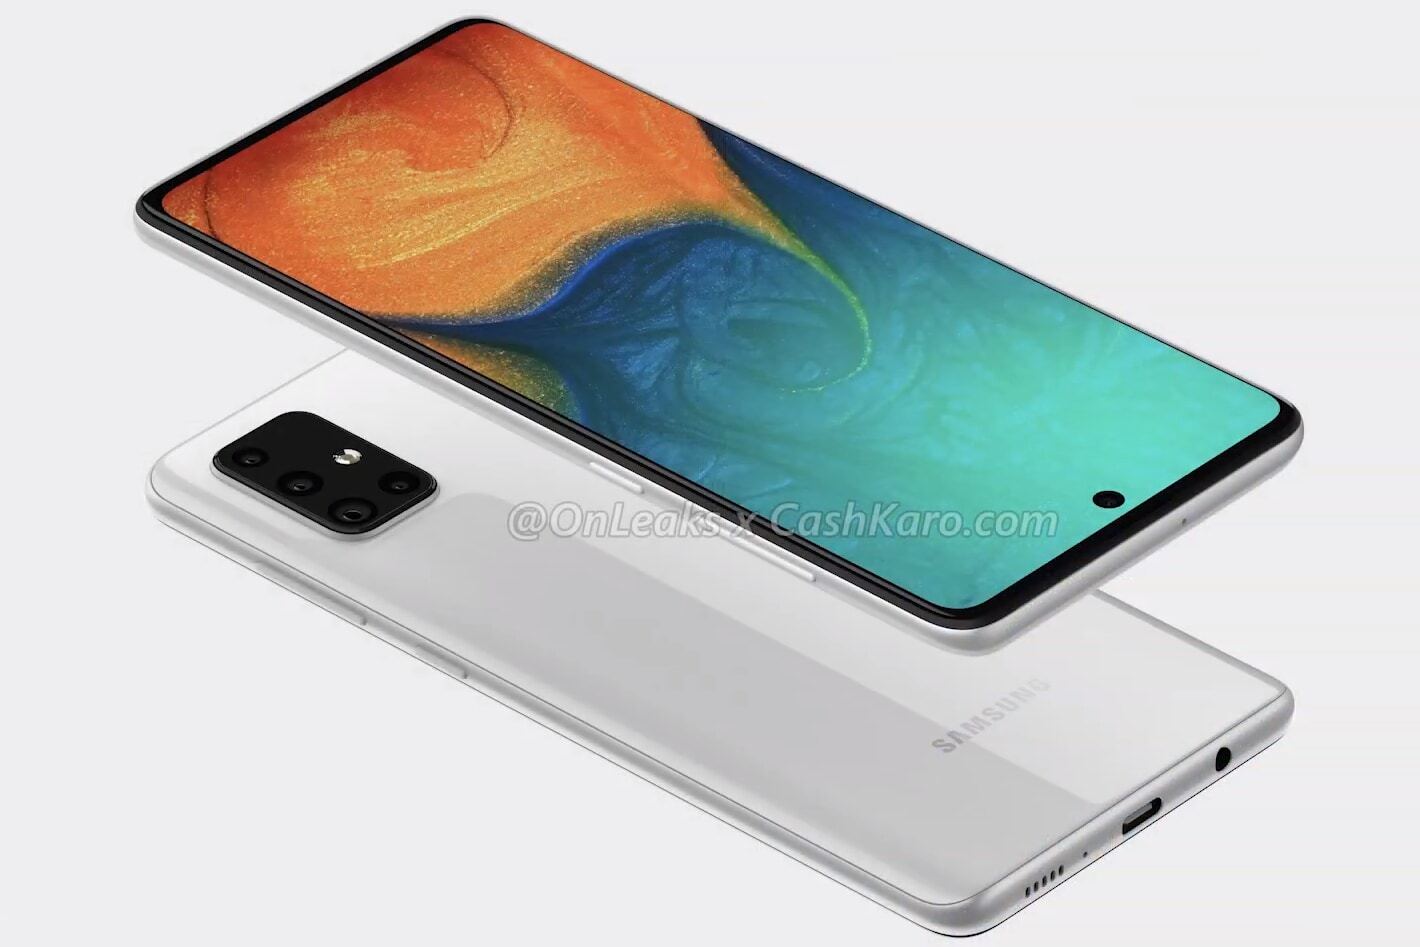 Quad-camera Galaxy A71 leaks with massive punch-hole display, headphone jack